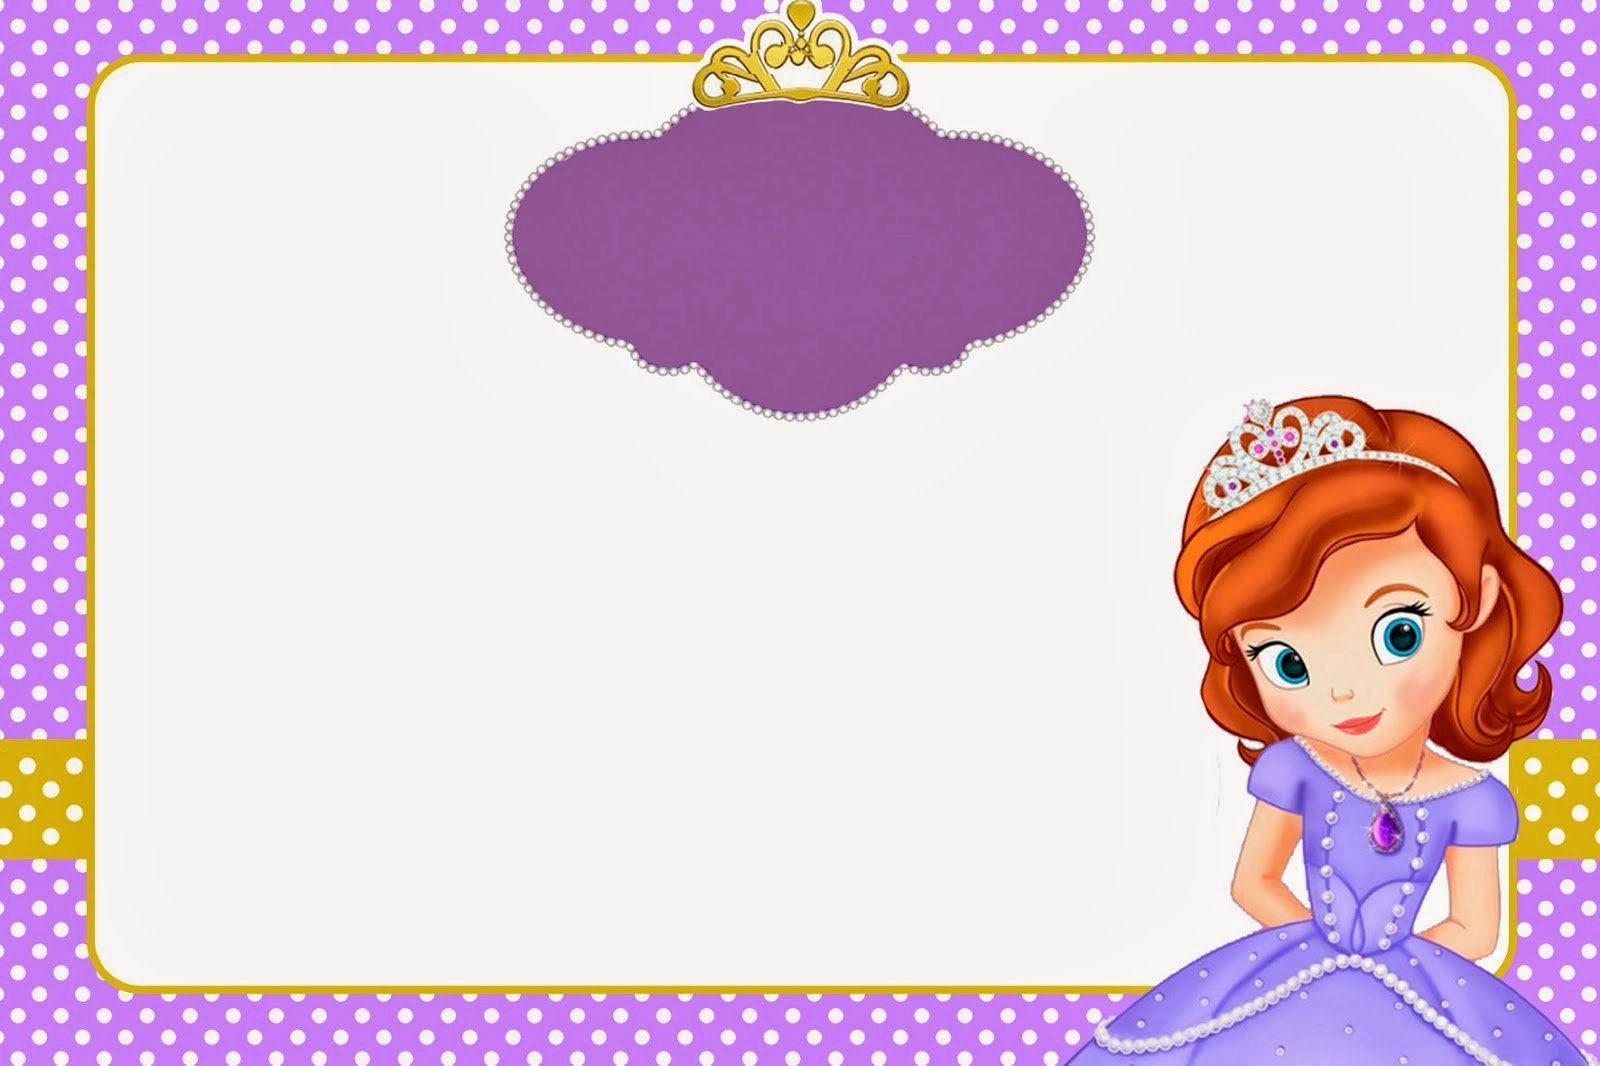 Sofia the First Template New sofia the First Invitations and Free Party Printables